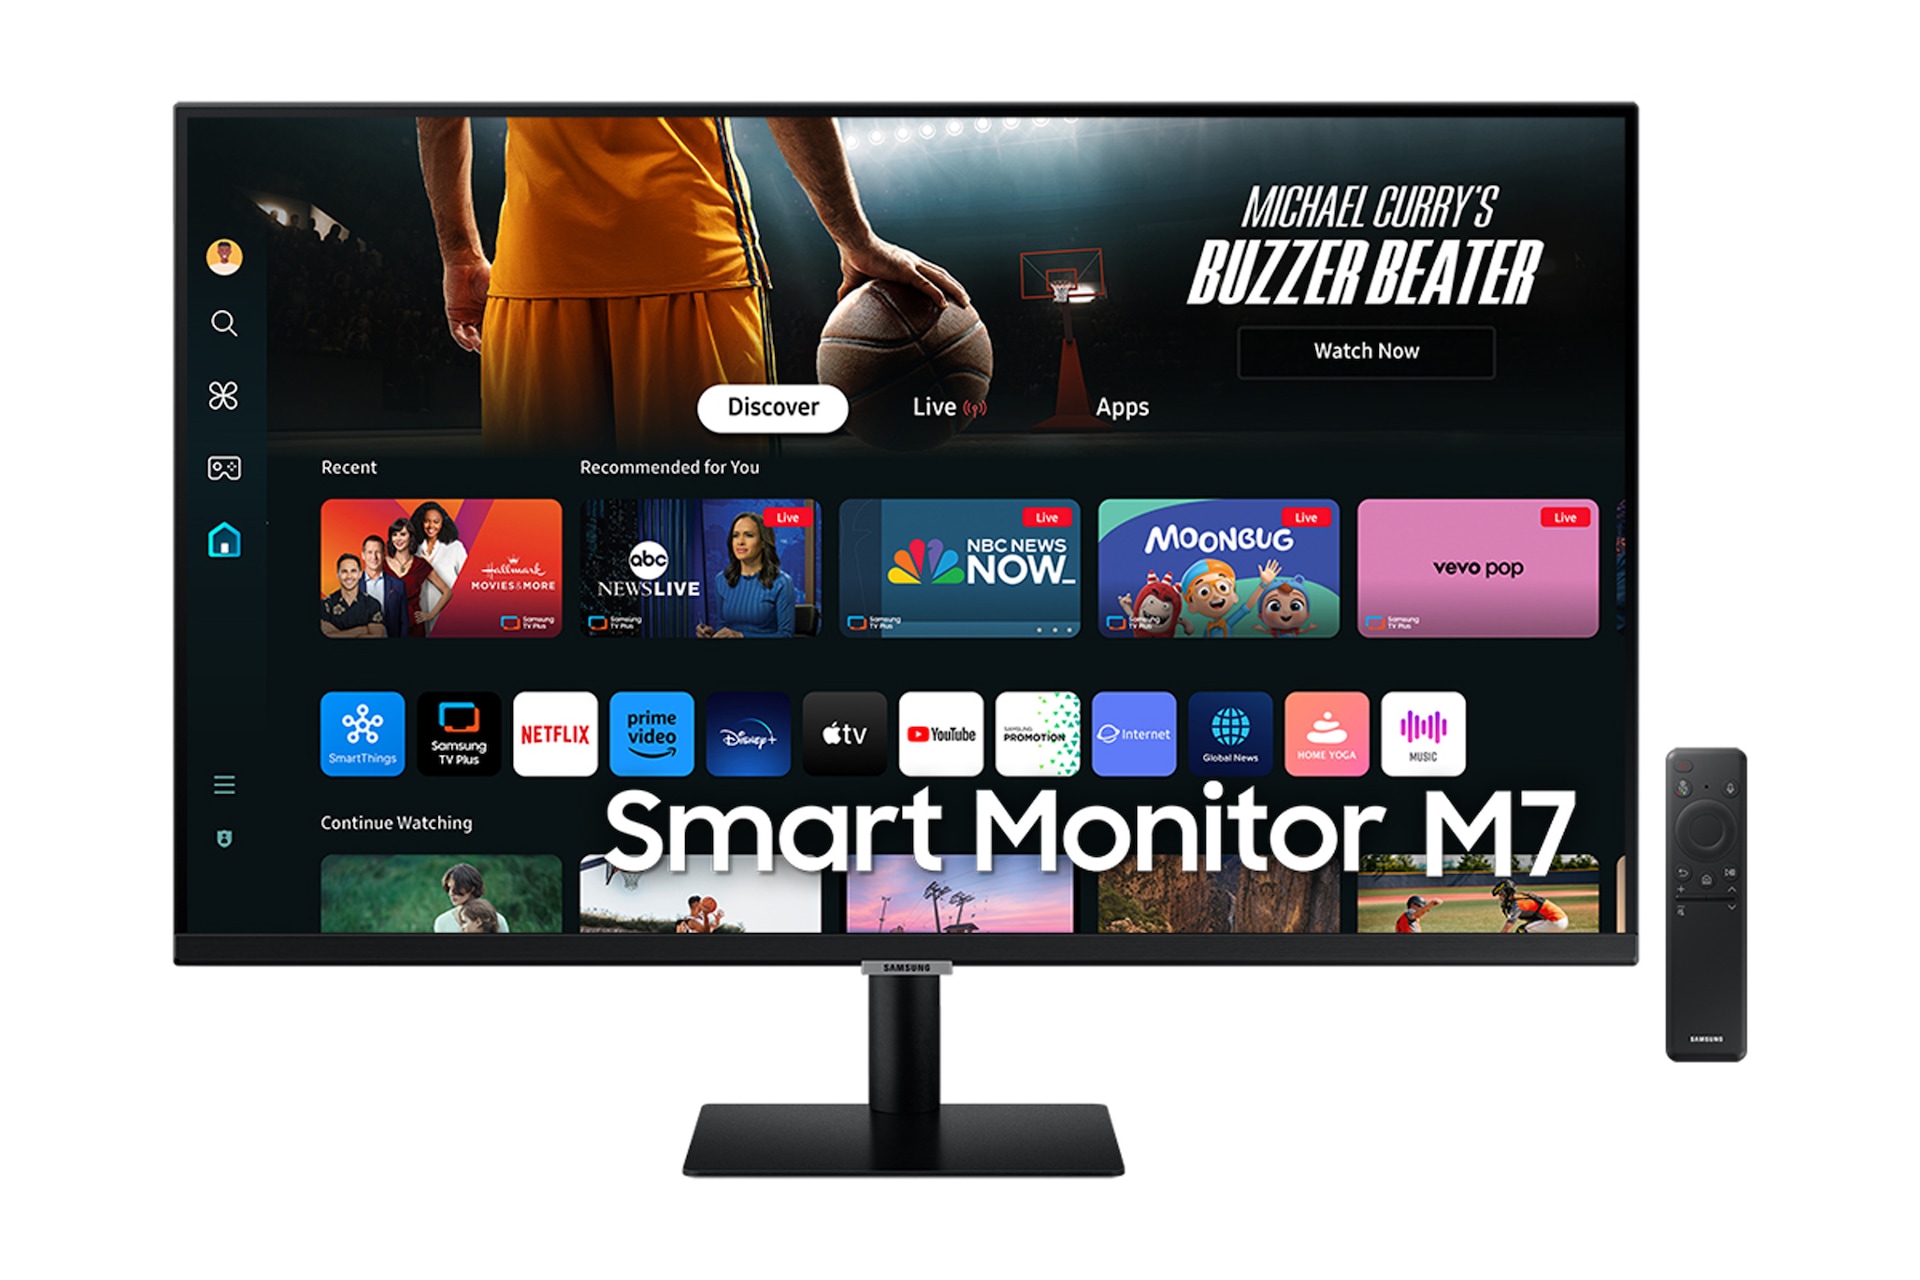 Front of 32 inch Samsung Smart Monitor M70D with Smart TV Apps on screen, and remote control.